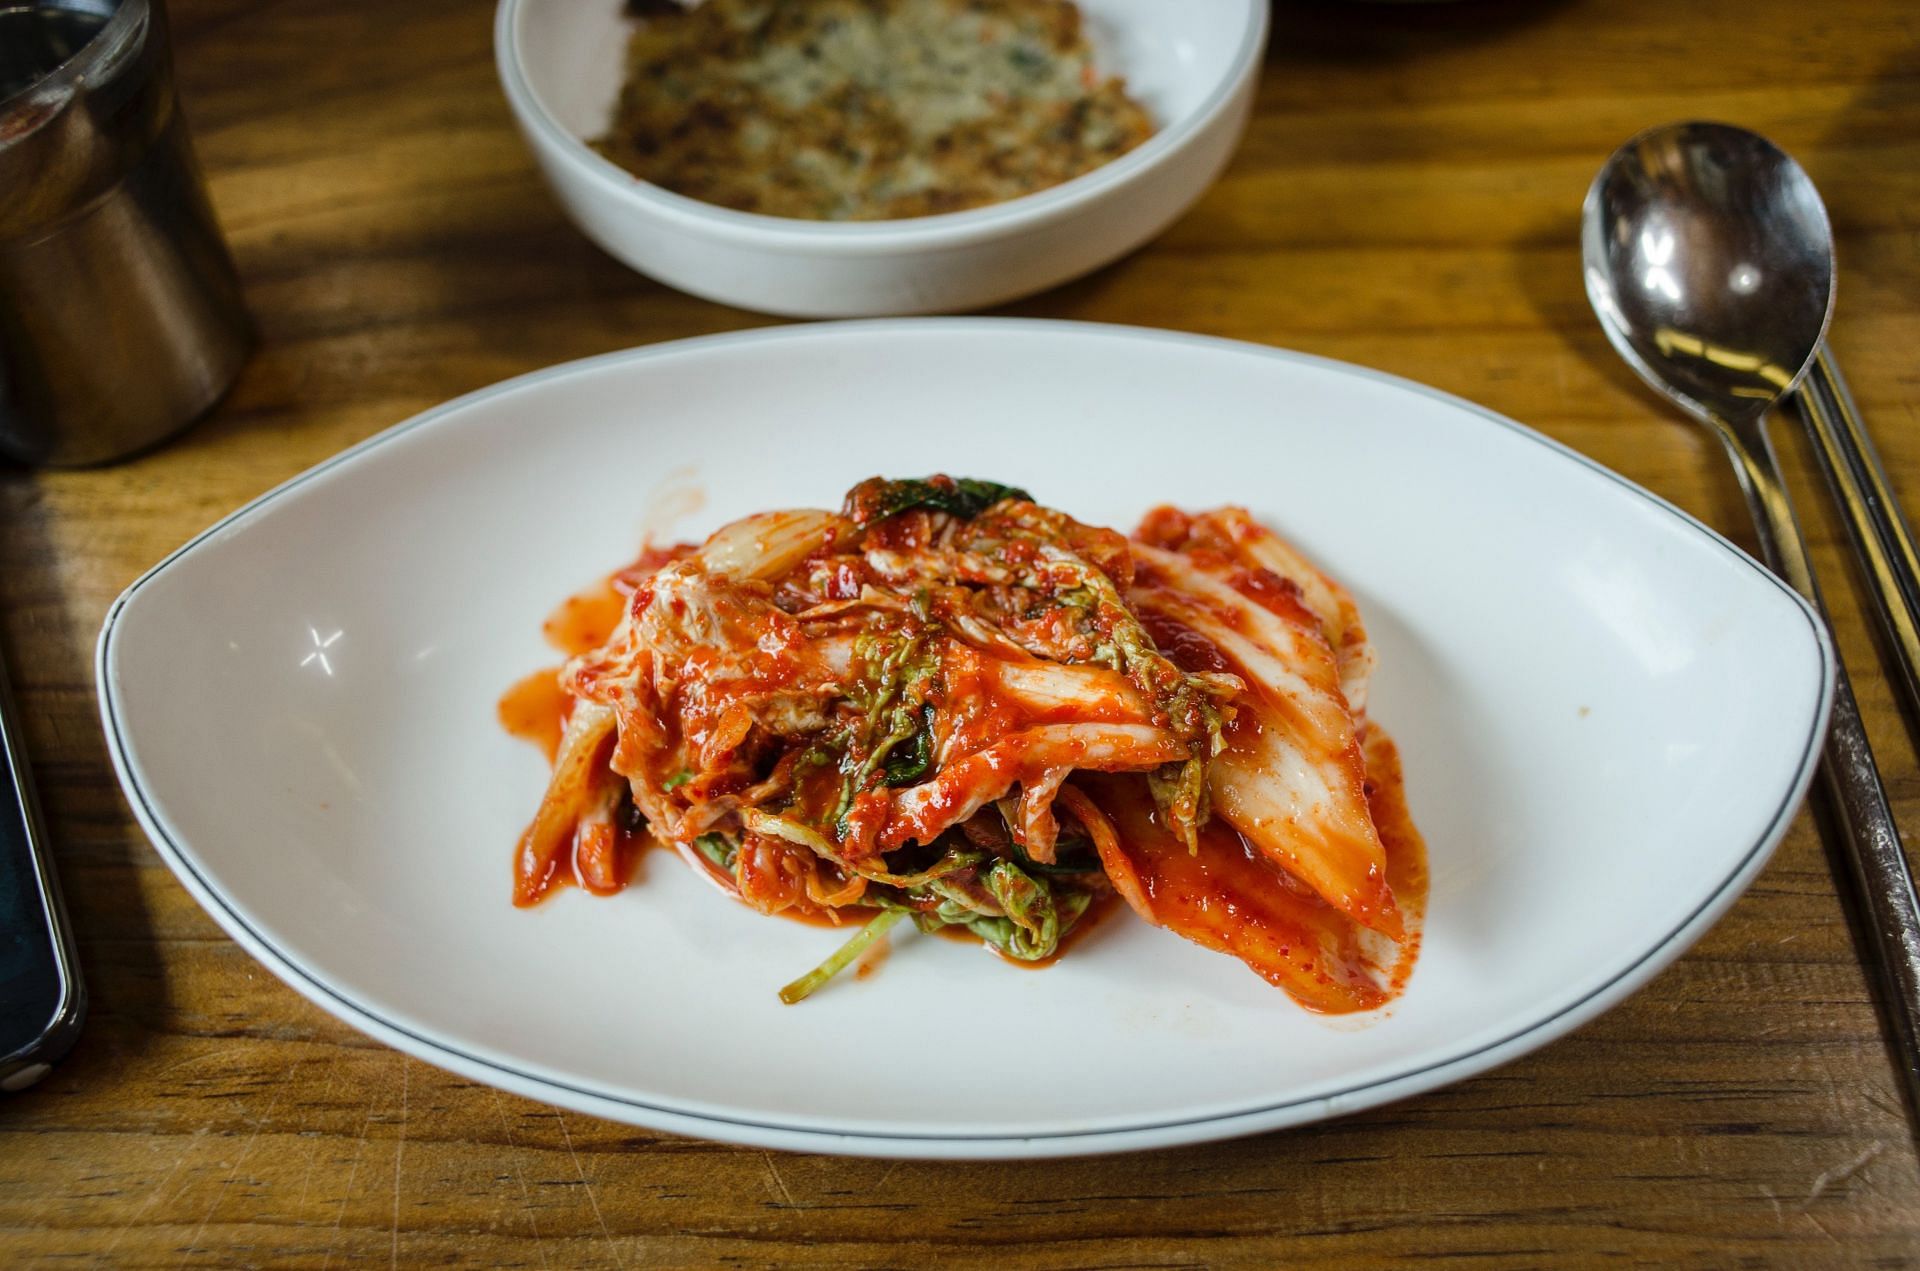 Kimchi contains different veggies. (Image via Pexels/ Makafood)